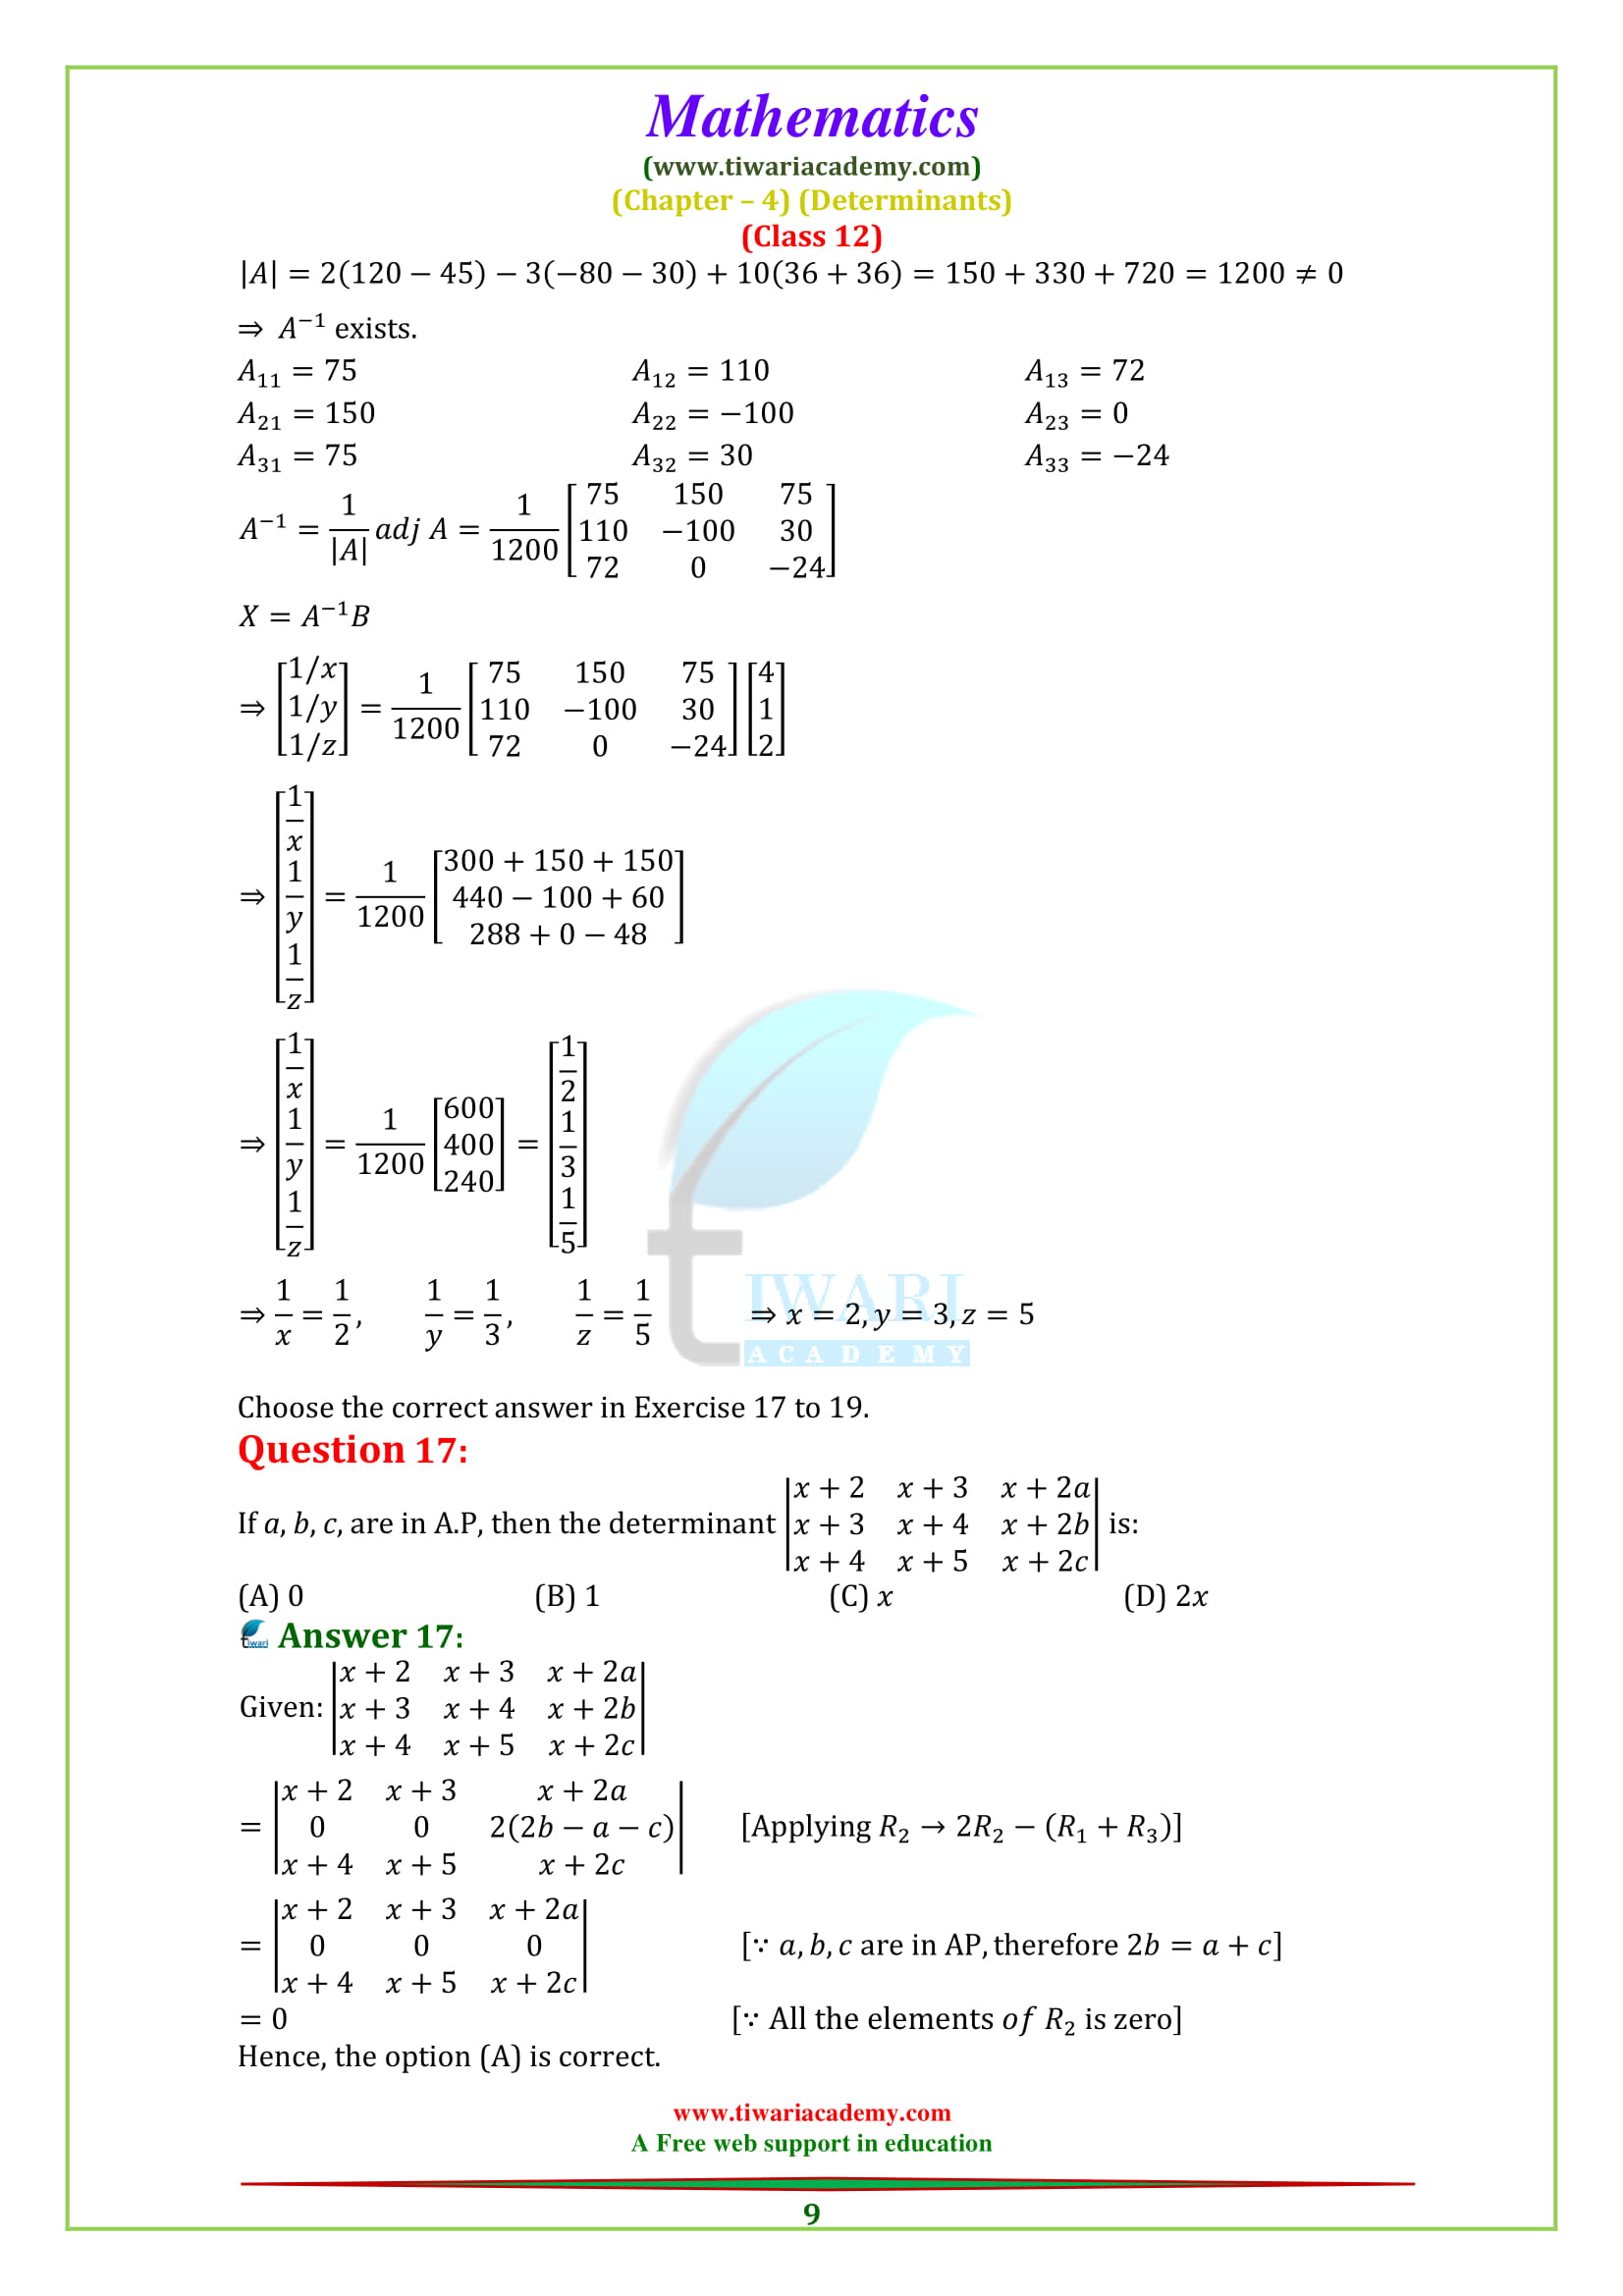 12 Maths miscellaneous exercise 4 sols in English